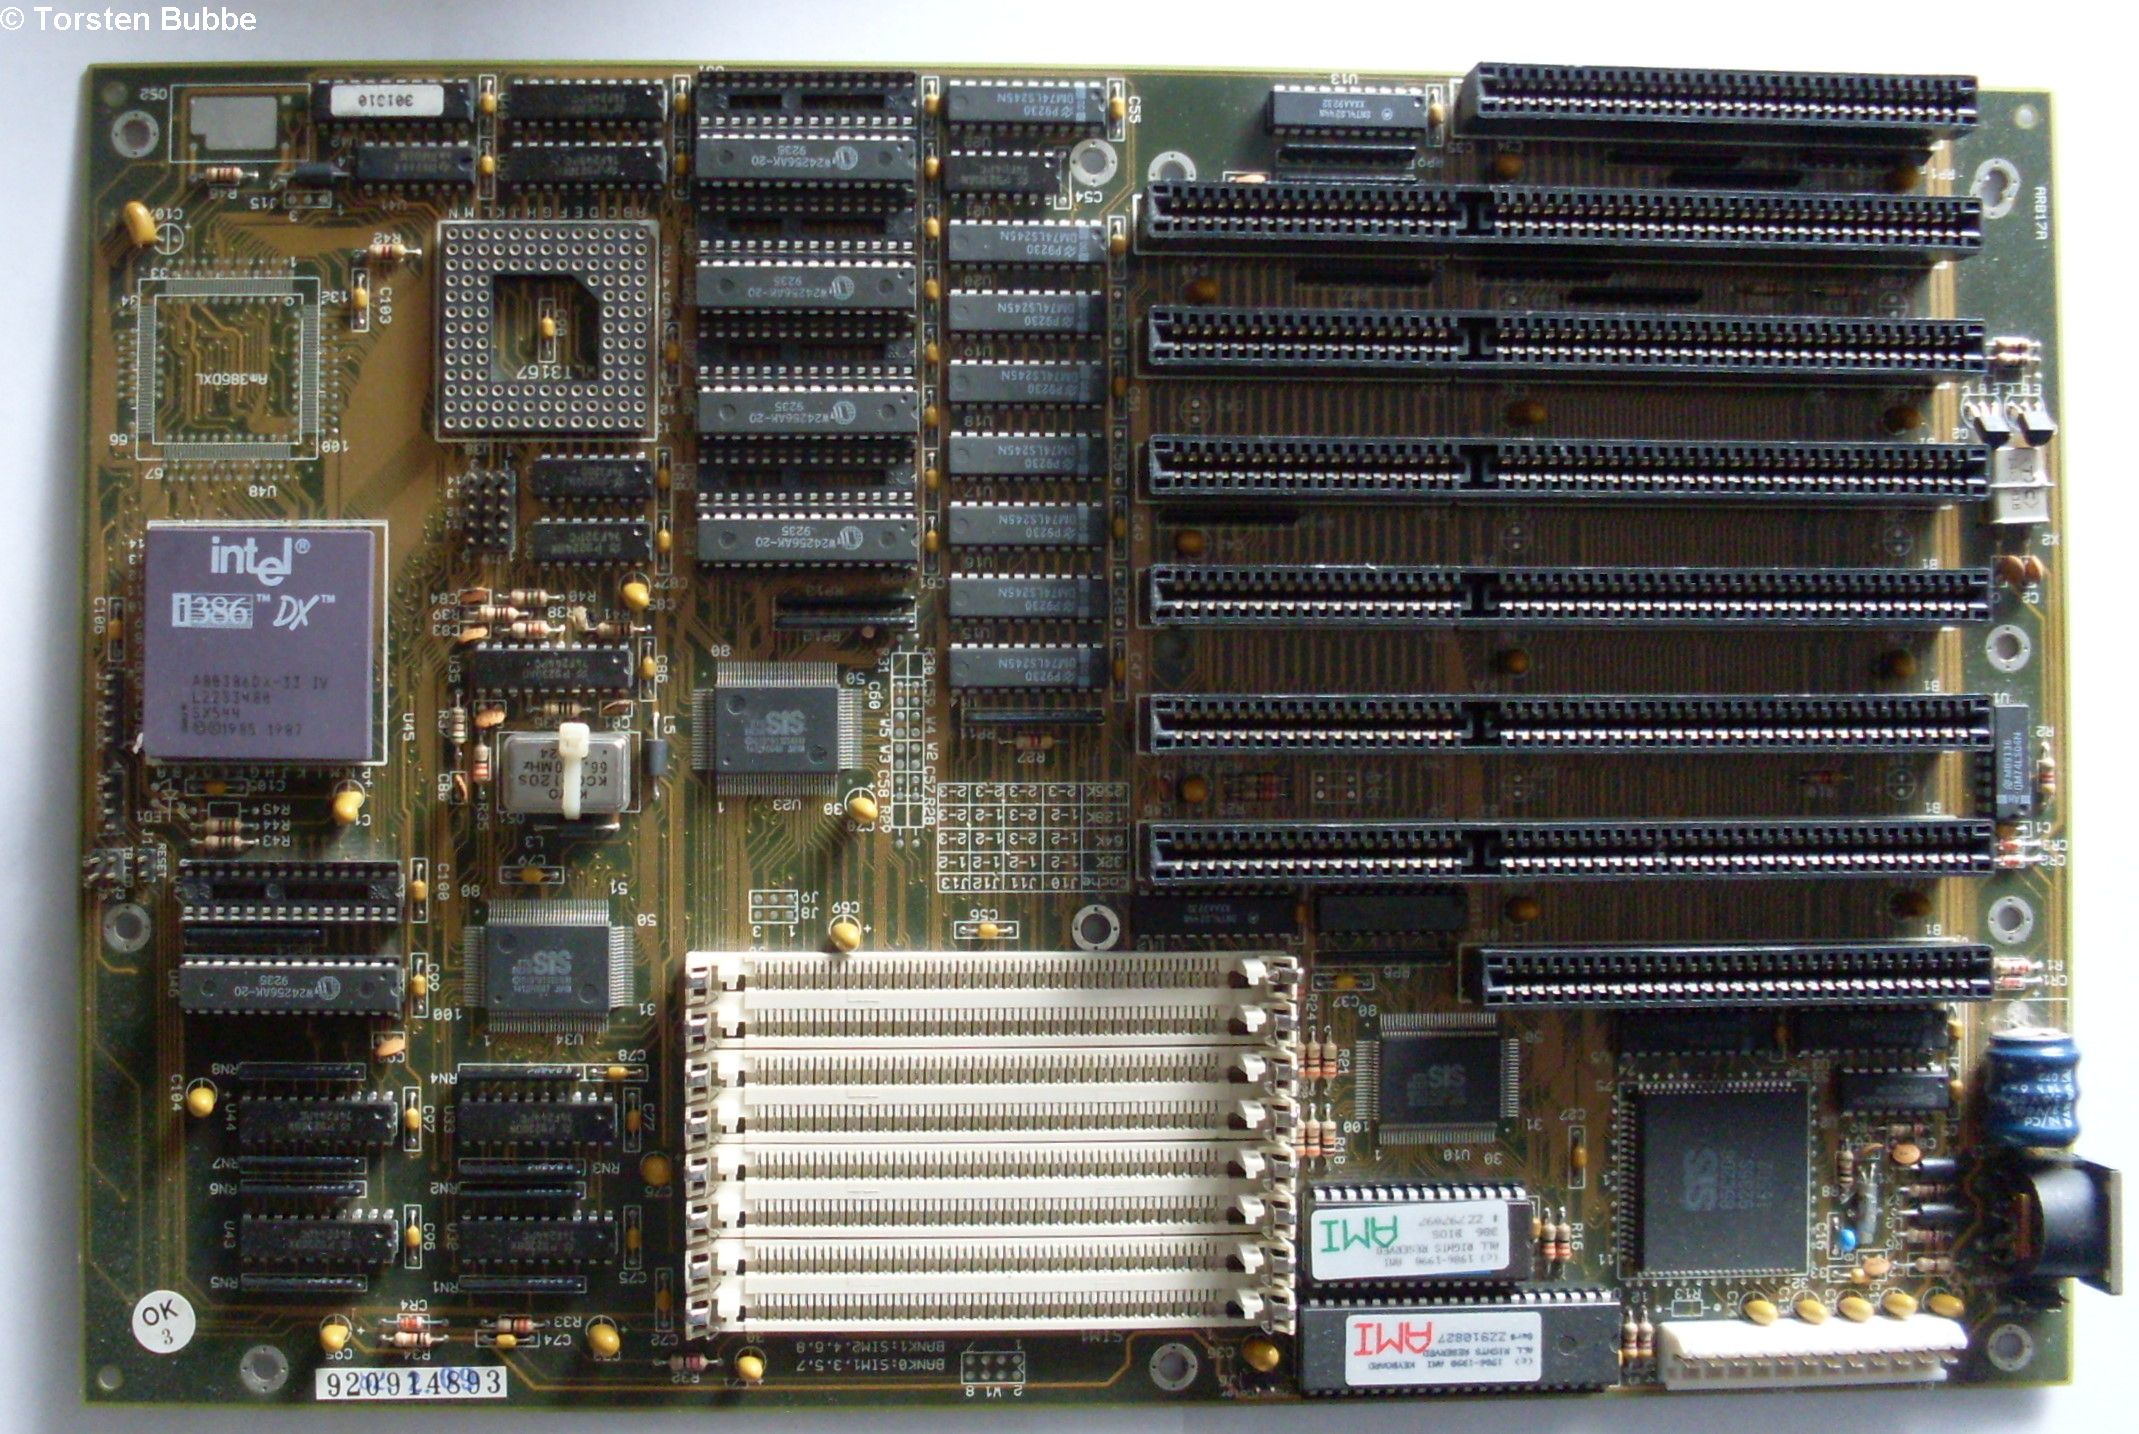 386 Processor and motherboard.  Notice it says DX.  SX meant the lack of a math co processor on the processor.  The open slot above the processor to the right was to add an aftermarket math co processor if you needed one.